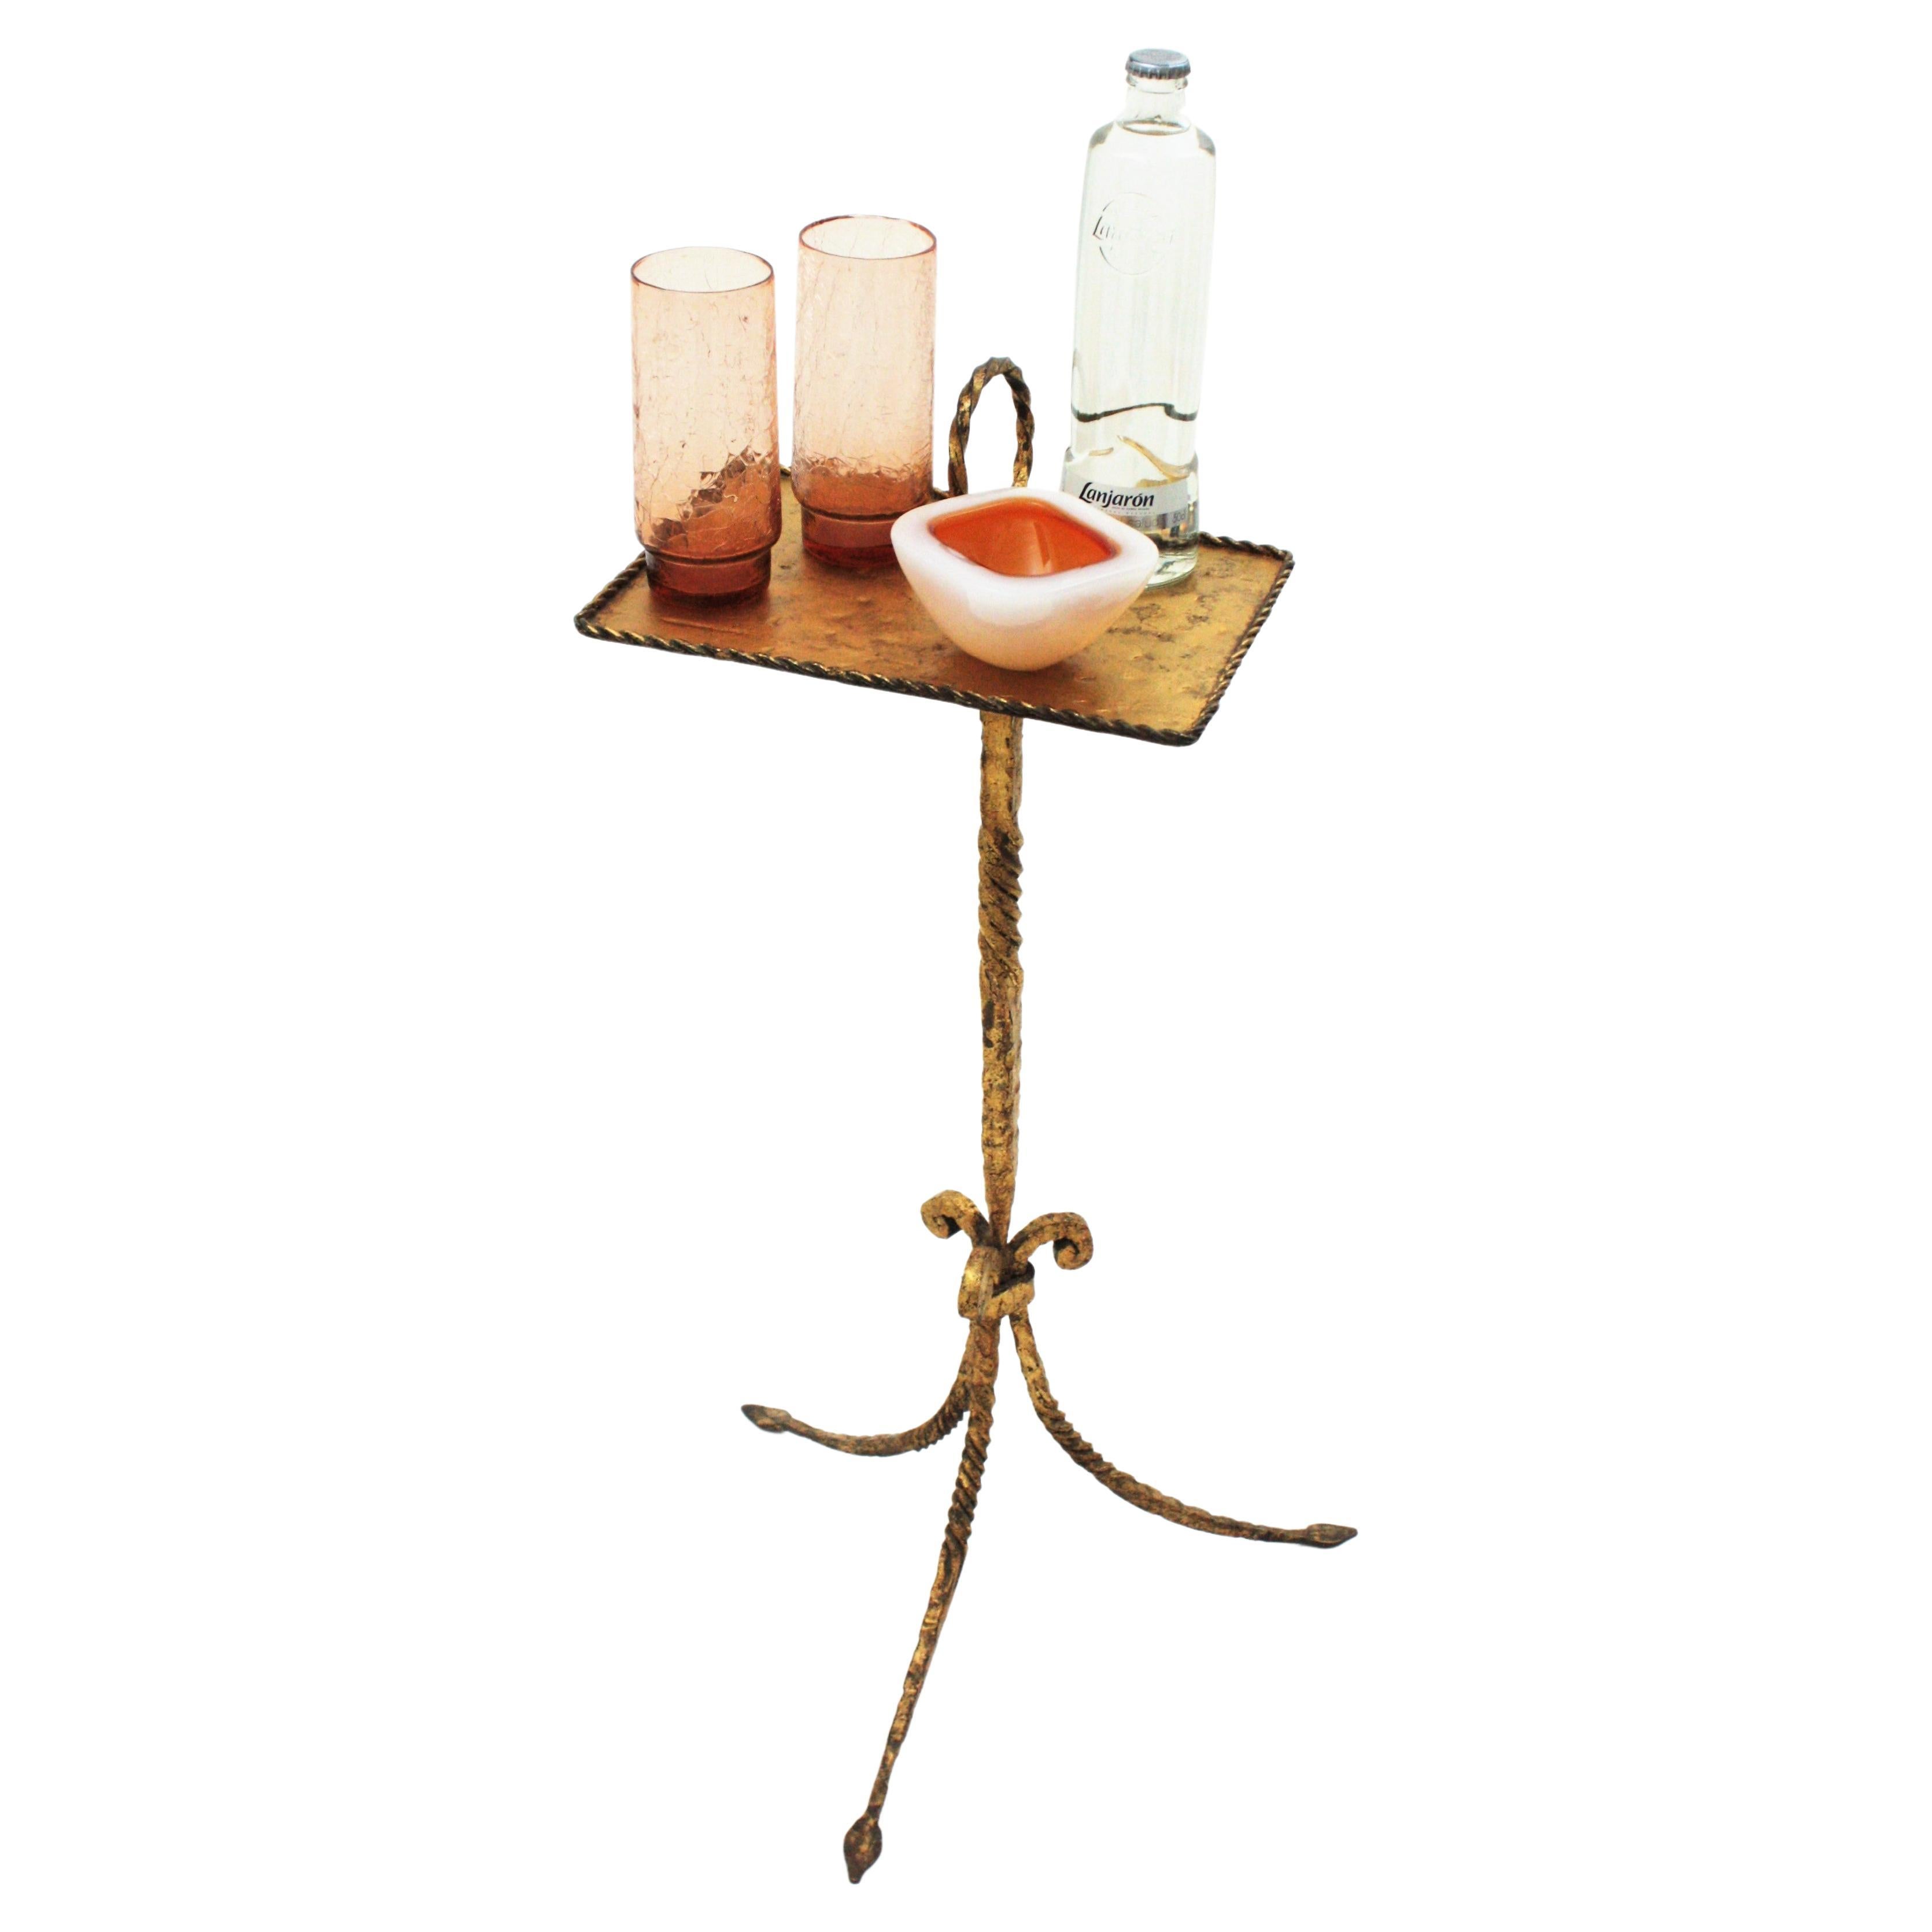 One of a kind wrought gilt iron end table with ashtray. Spain, 1940s-1950s.
This stylish hand forged iron table features a rectangular tabletop standing on a tripod base. The top has an iron twisted ring as decorative holder and an ashtray attached